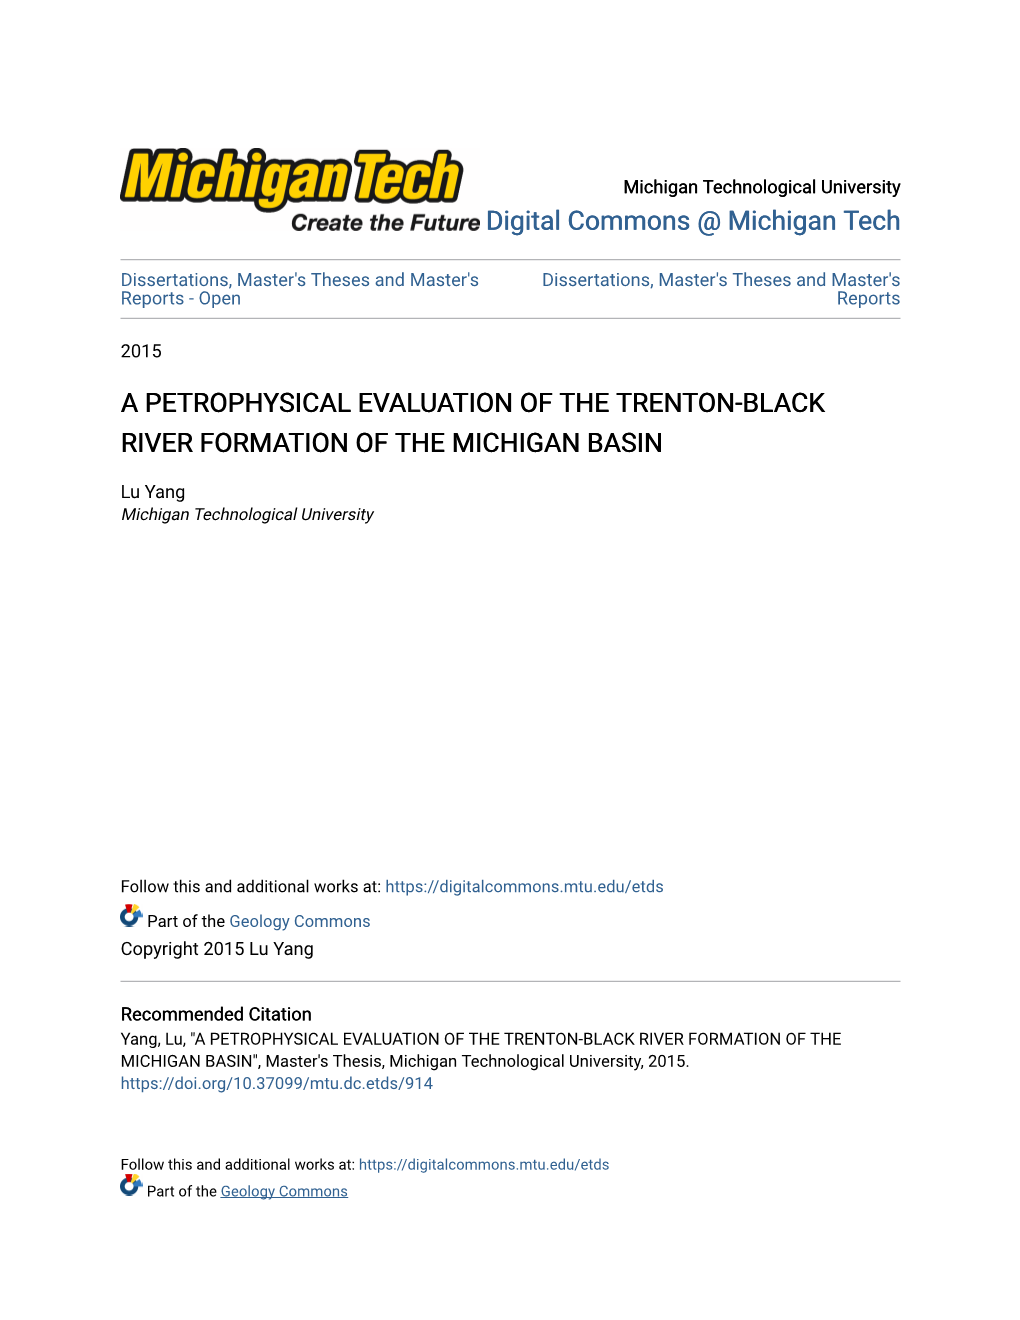 A Petrophysical Evaluation of the Trenton-Black River Formation of the Michigan Basin